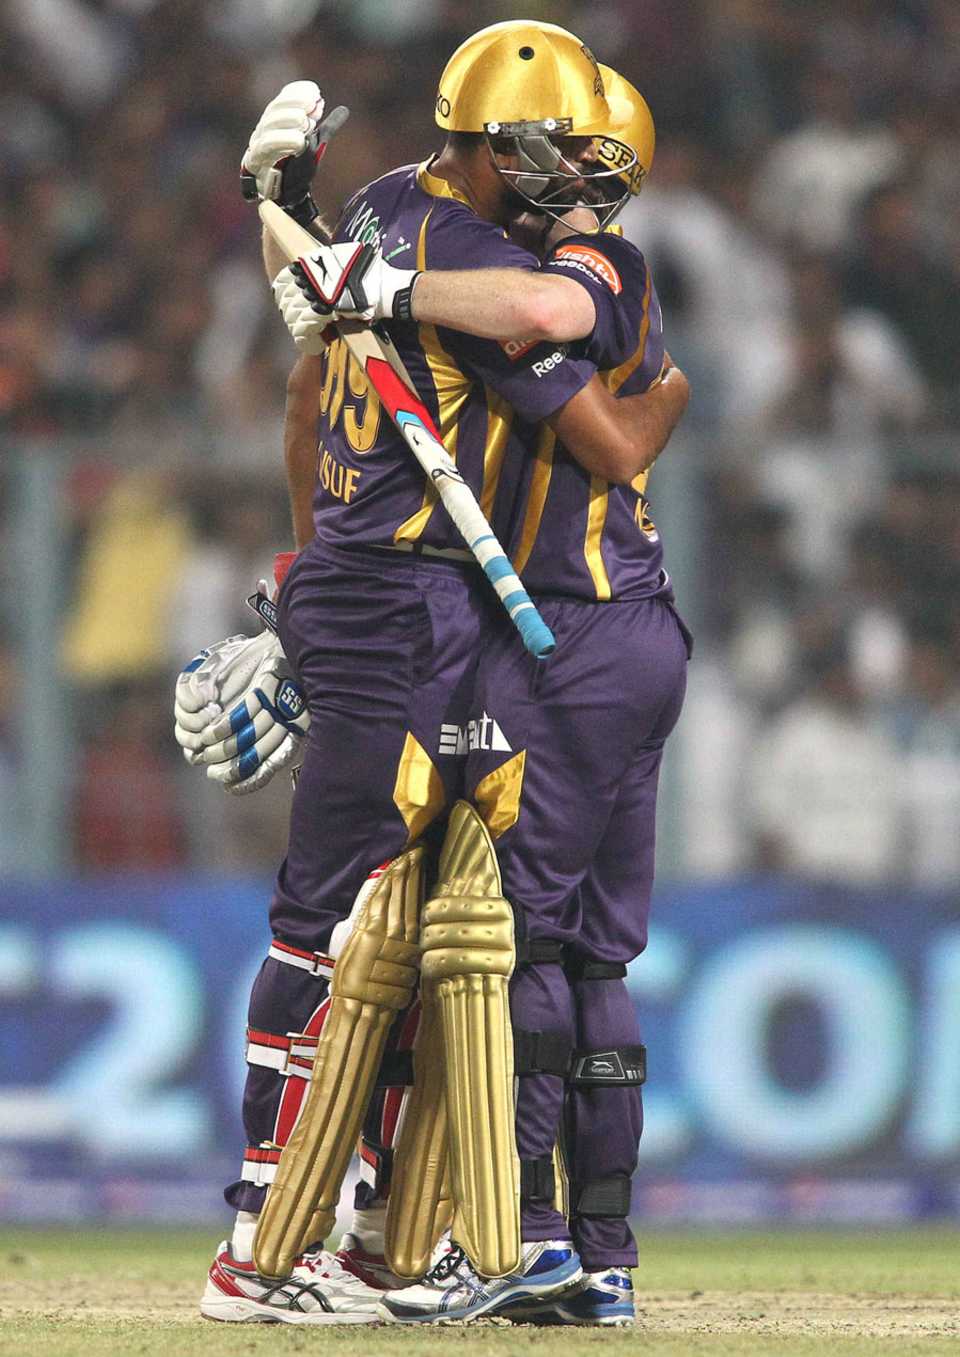 Yusuf Pathan and Eoin Morgan embrace one another after leading Kolkata Knight Riders to victory, Kolkata Knight Riders v Delhi Daredevils, IPL, Kolkata, April 3, 2013